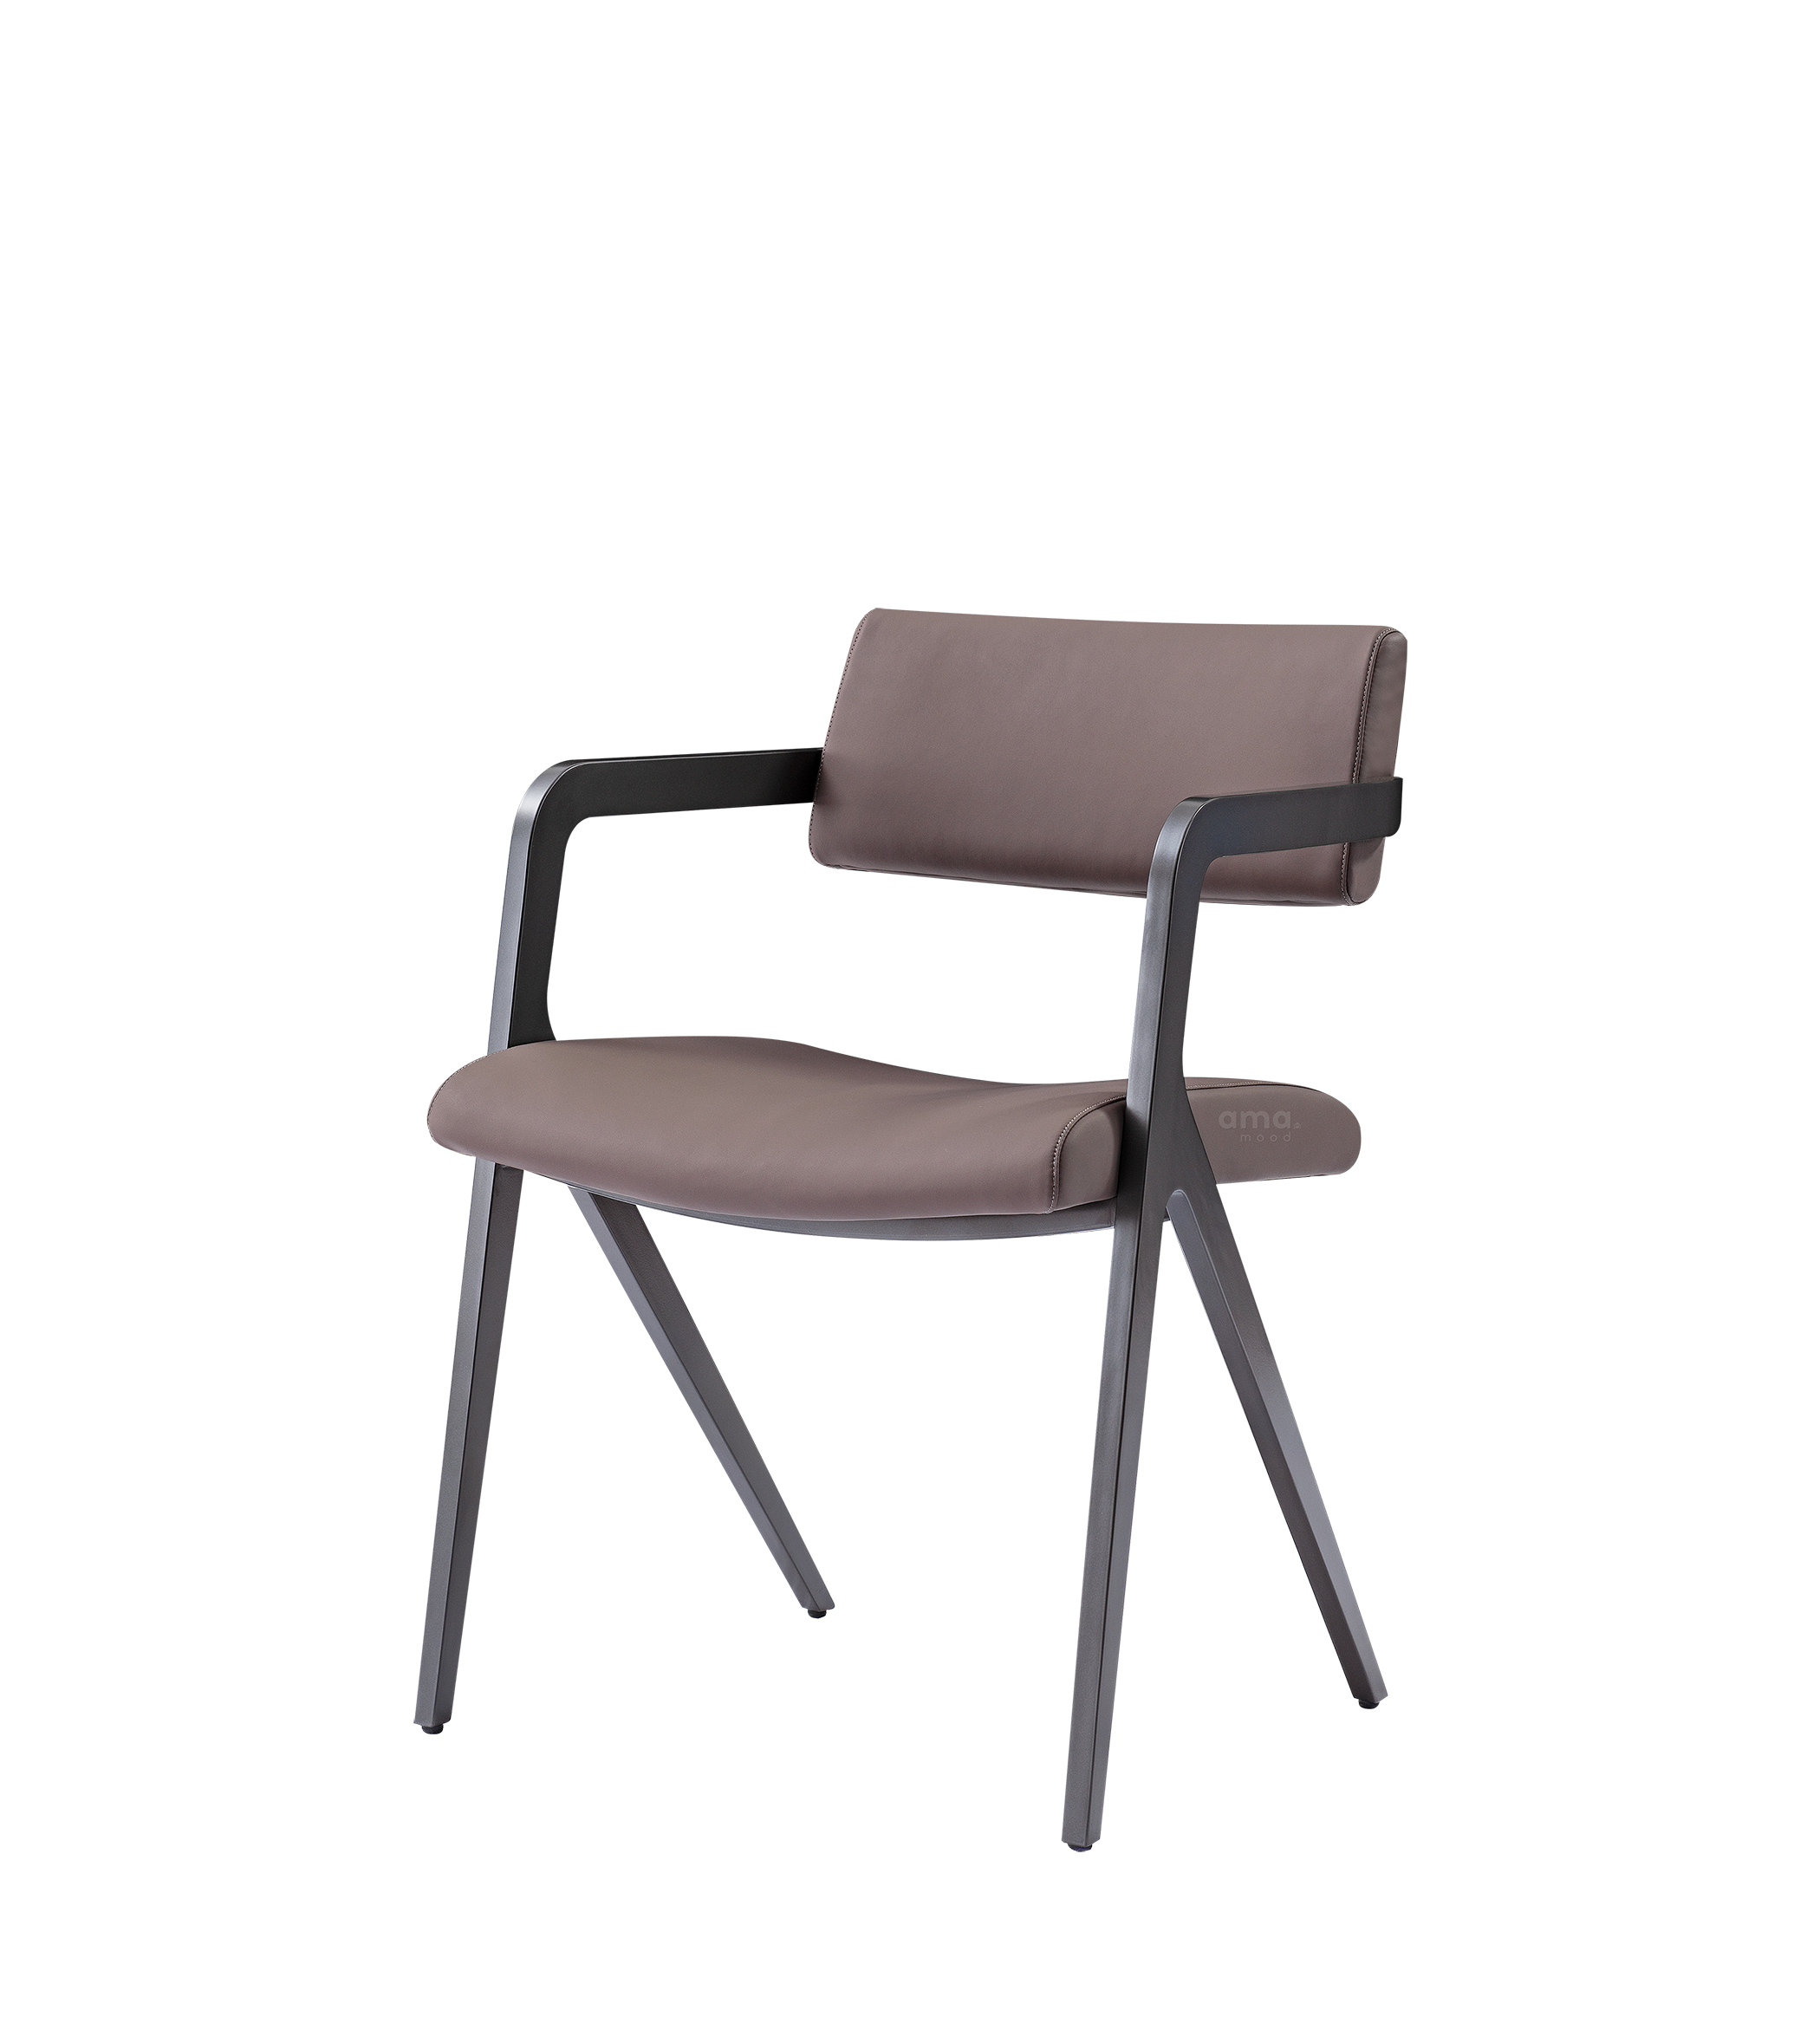 Best Dining Chair | Dining Chair In China